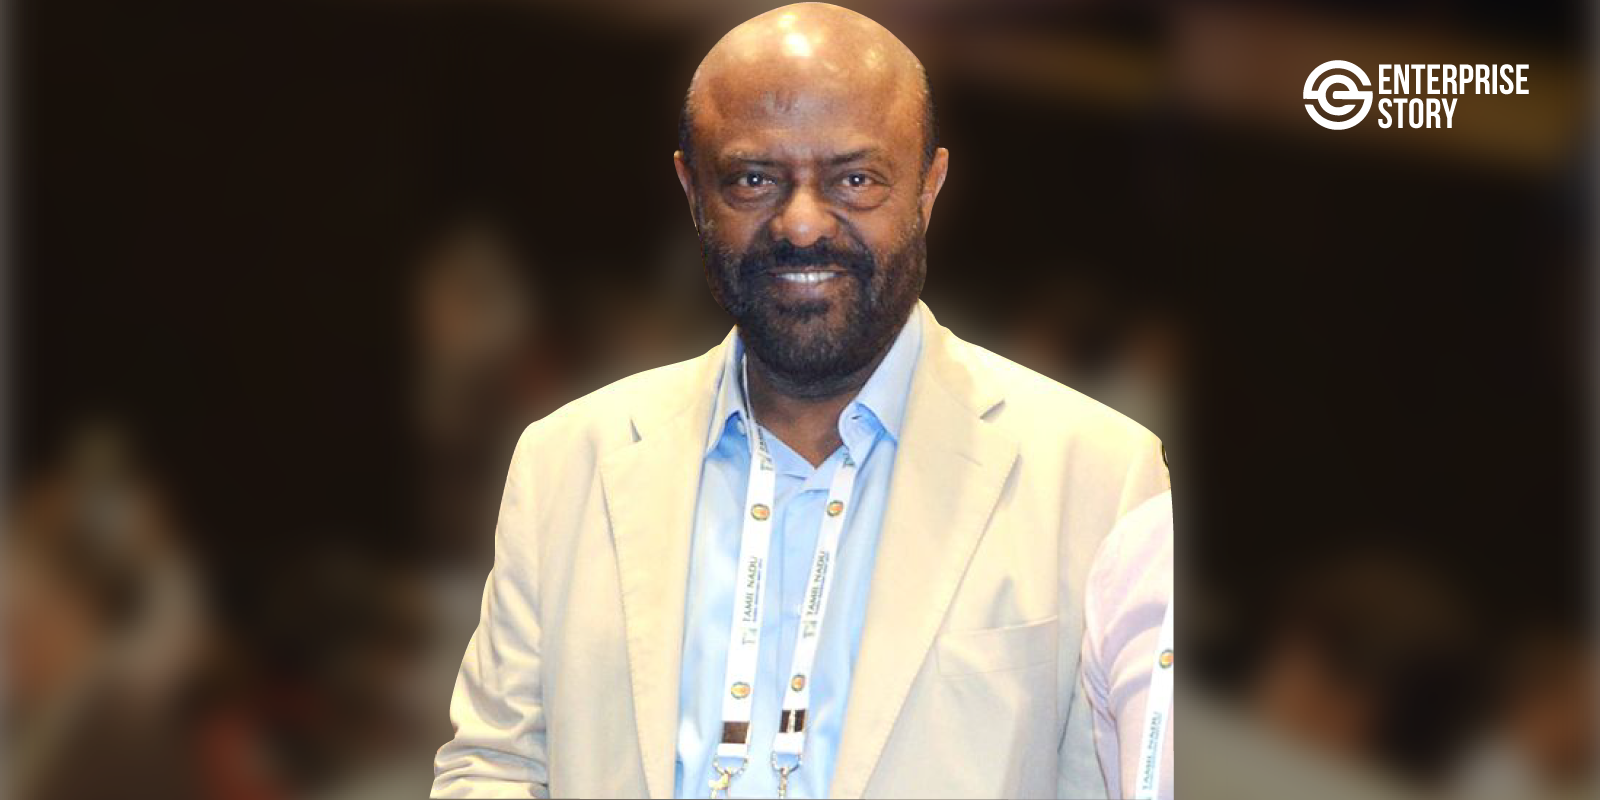 The HCL Technologies that Shiv Nadar built—and grew